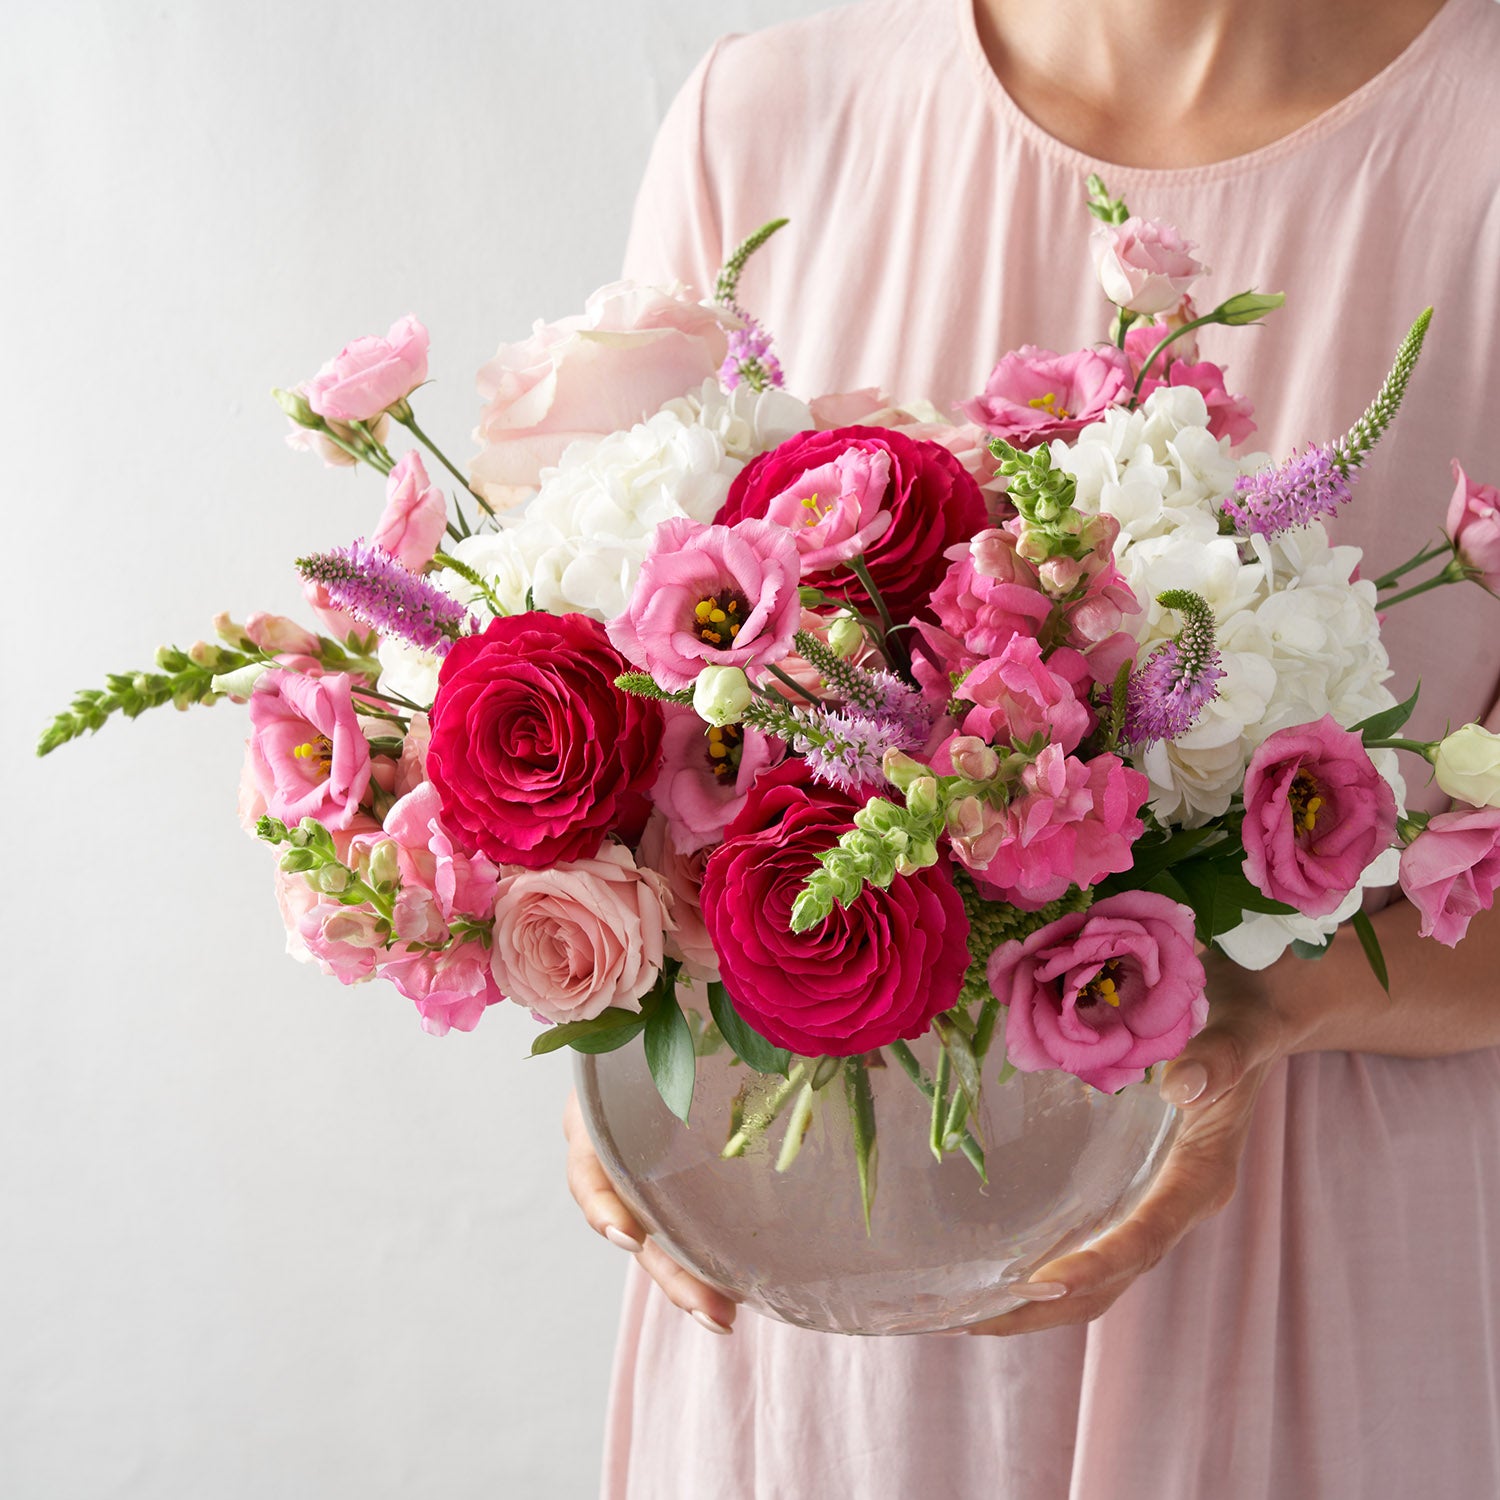 woman in pink dress holding rosebowl filled with pink flowers, including roses, lisianthus and snapdragons.